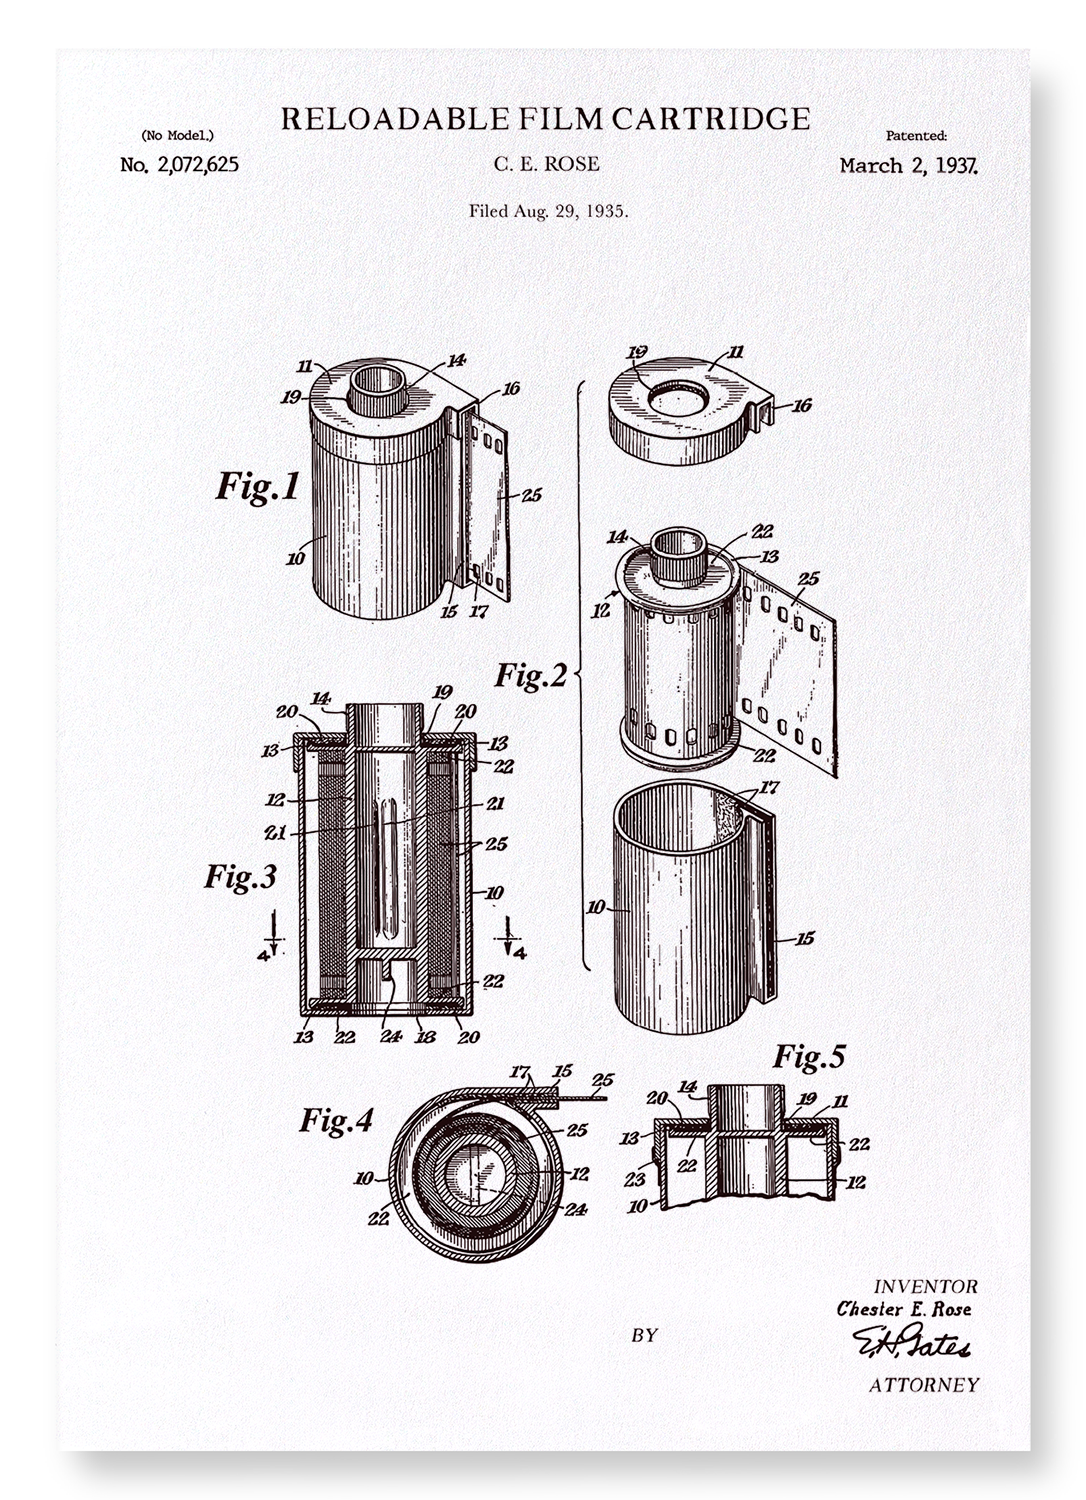 PATENT OF RELOADABLE FILM (1937)